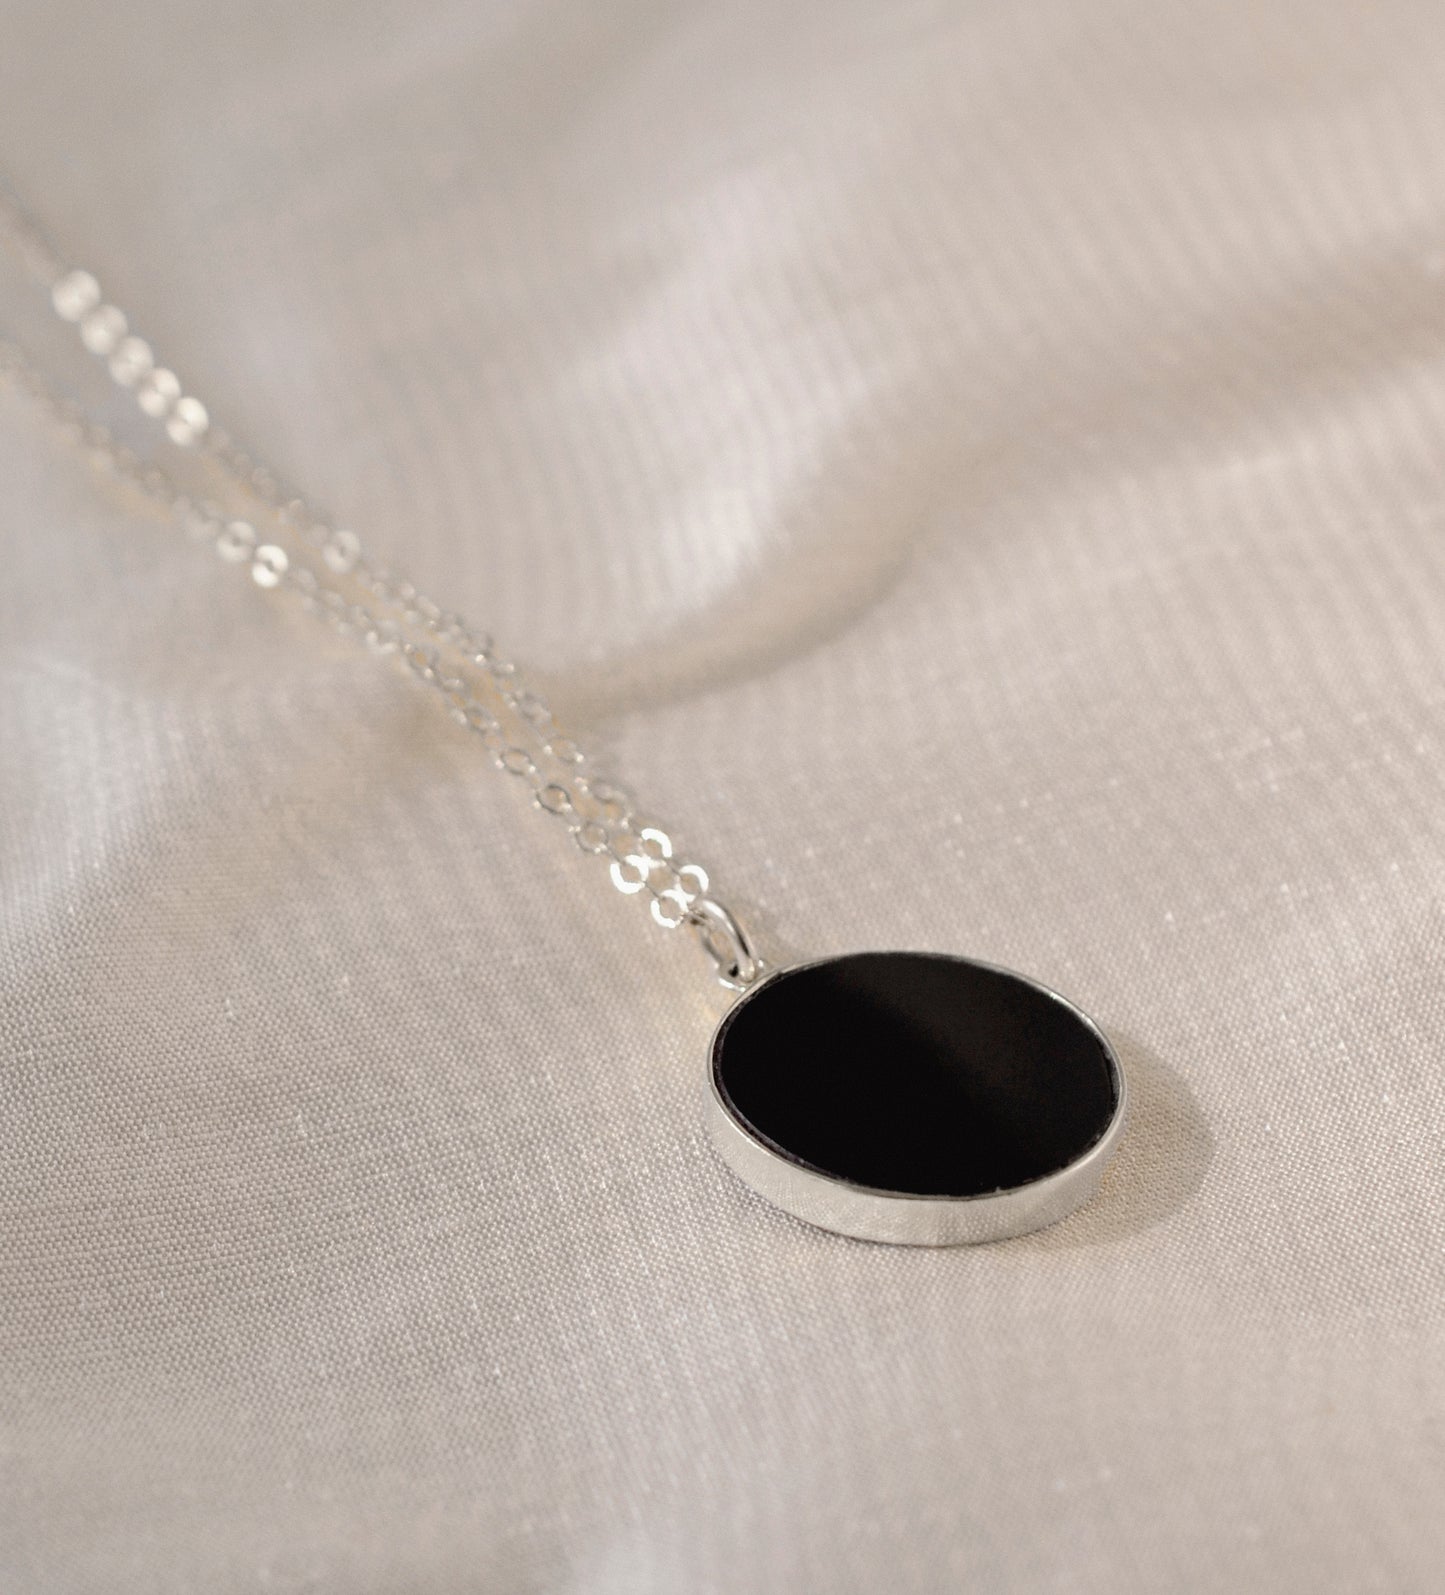 Smooth Polished Black Onyx Circle Pendant on Simple Silver Chain. 